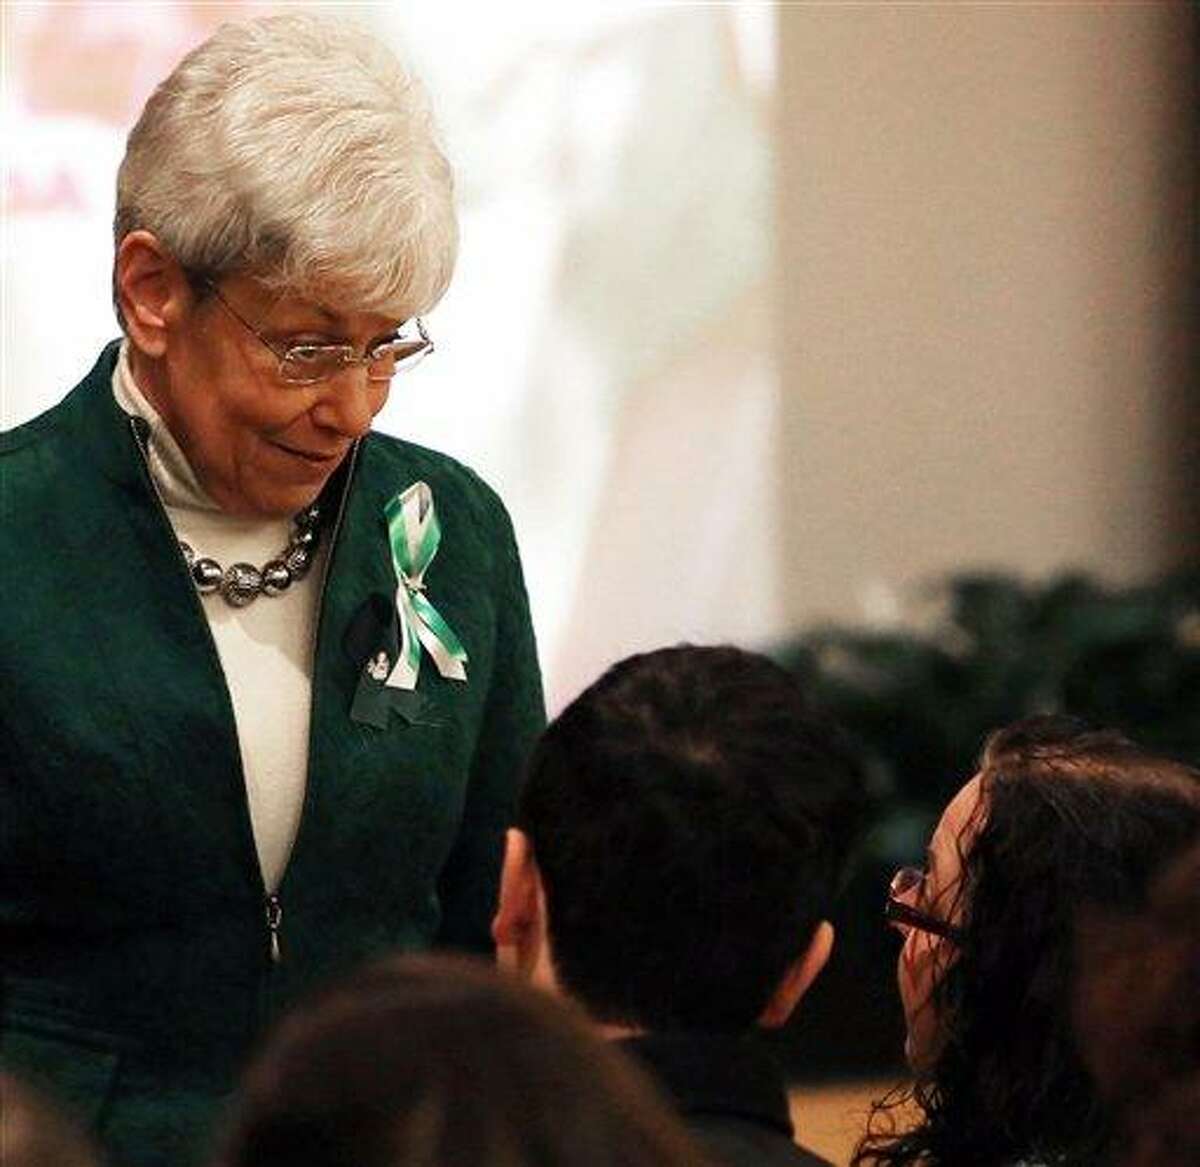 Conn. Lt. Governor Nancy Wyman speaks with Donna Soto mother of slain Sandy Hook Elementary School teacher Victoria Soto before a memorial to her daughter at Eastern Connecticut State University, Saturday March 9, 2013 in Willimantic, Conn The university gathered to remember the 2008 graduate who sacrificed her life to save her students during the December 14, 2012 school shooting where twenty children and six adults were slain by Adam Lanza. Soto was remembered by friends, university staff and family as a dedicated student and a caring individual. (AP Photo/Journal Inquirer, Jared Ramsdell)